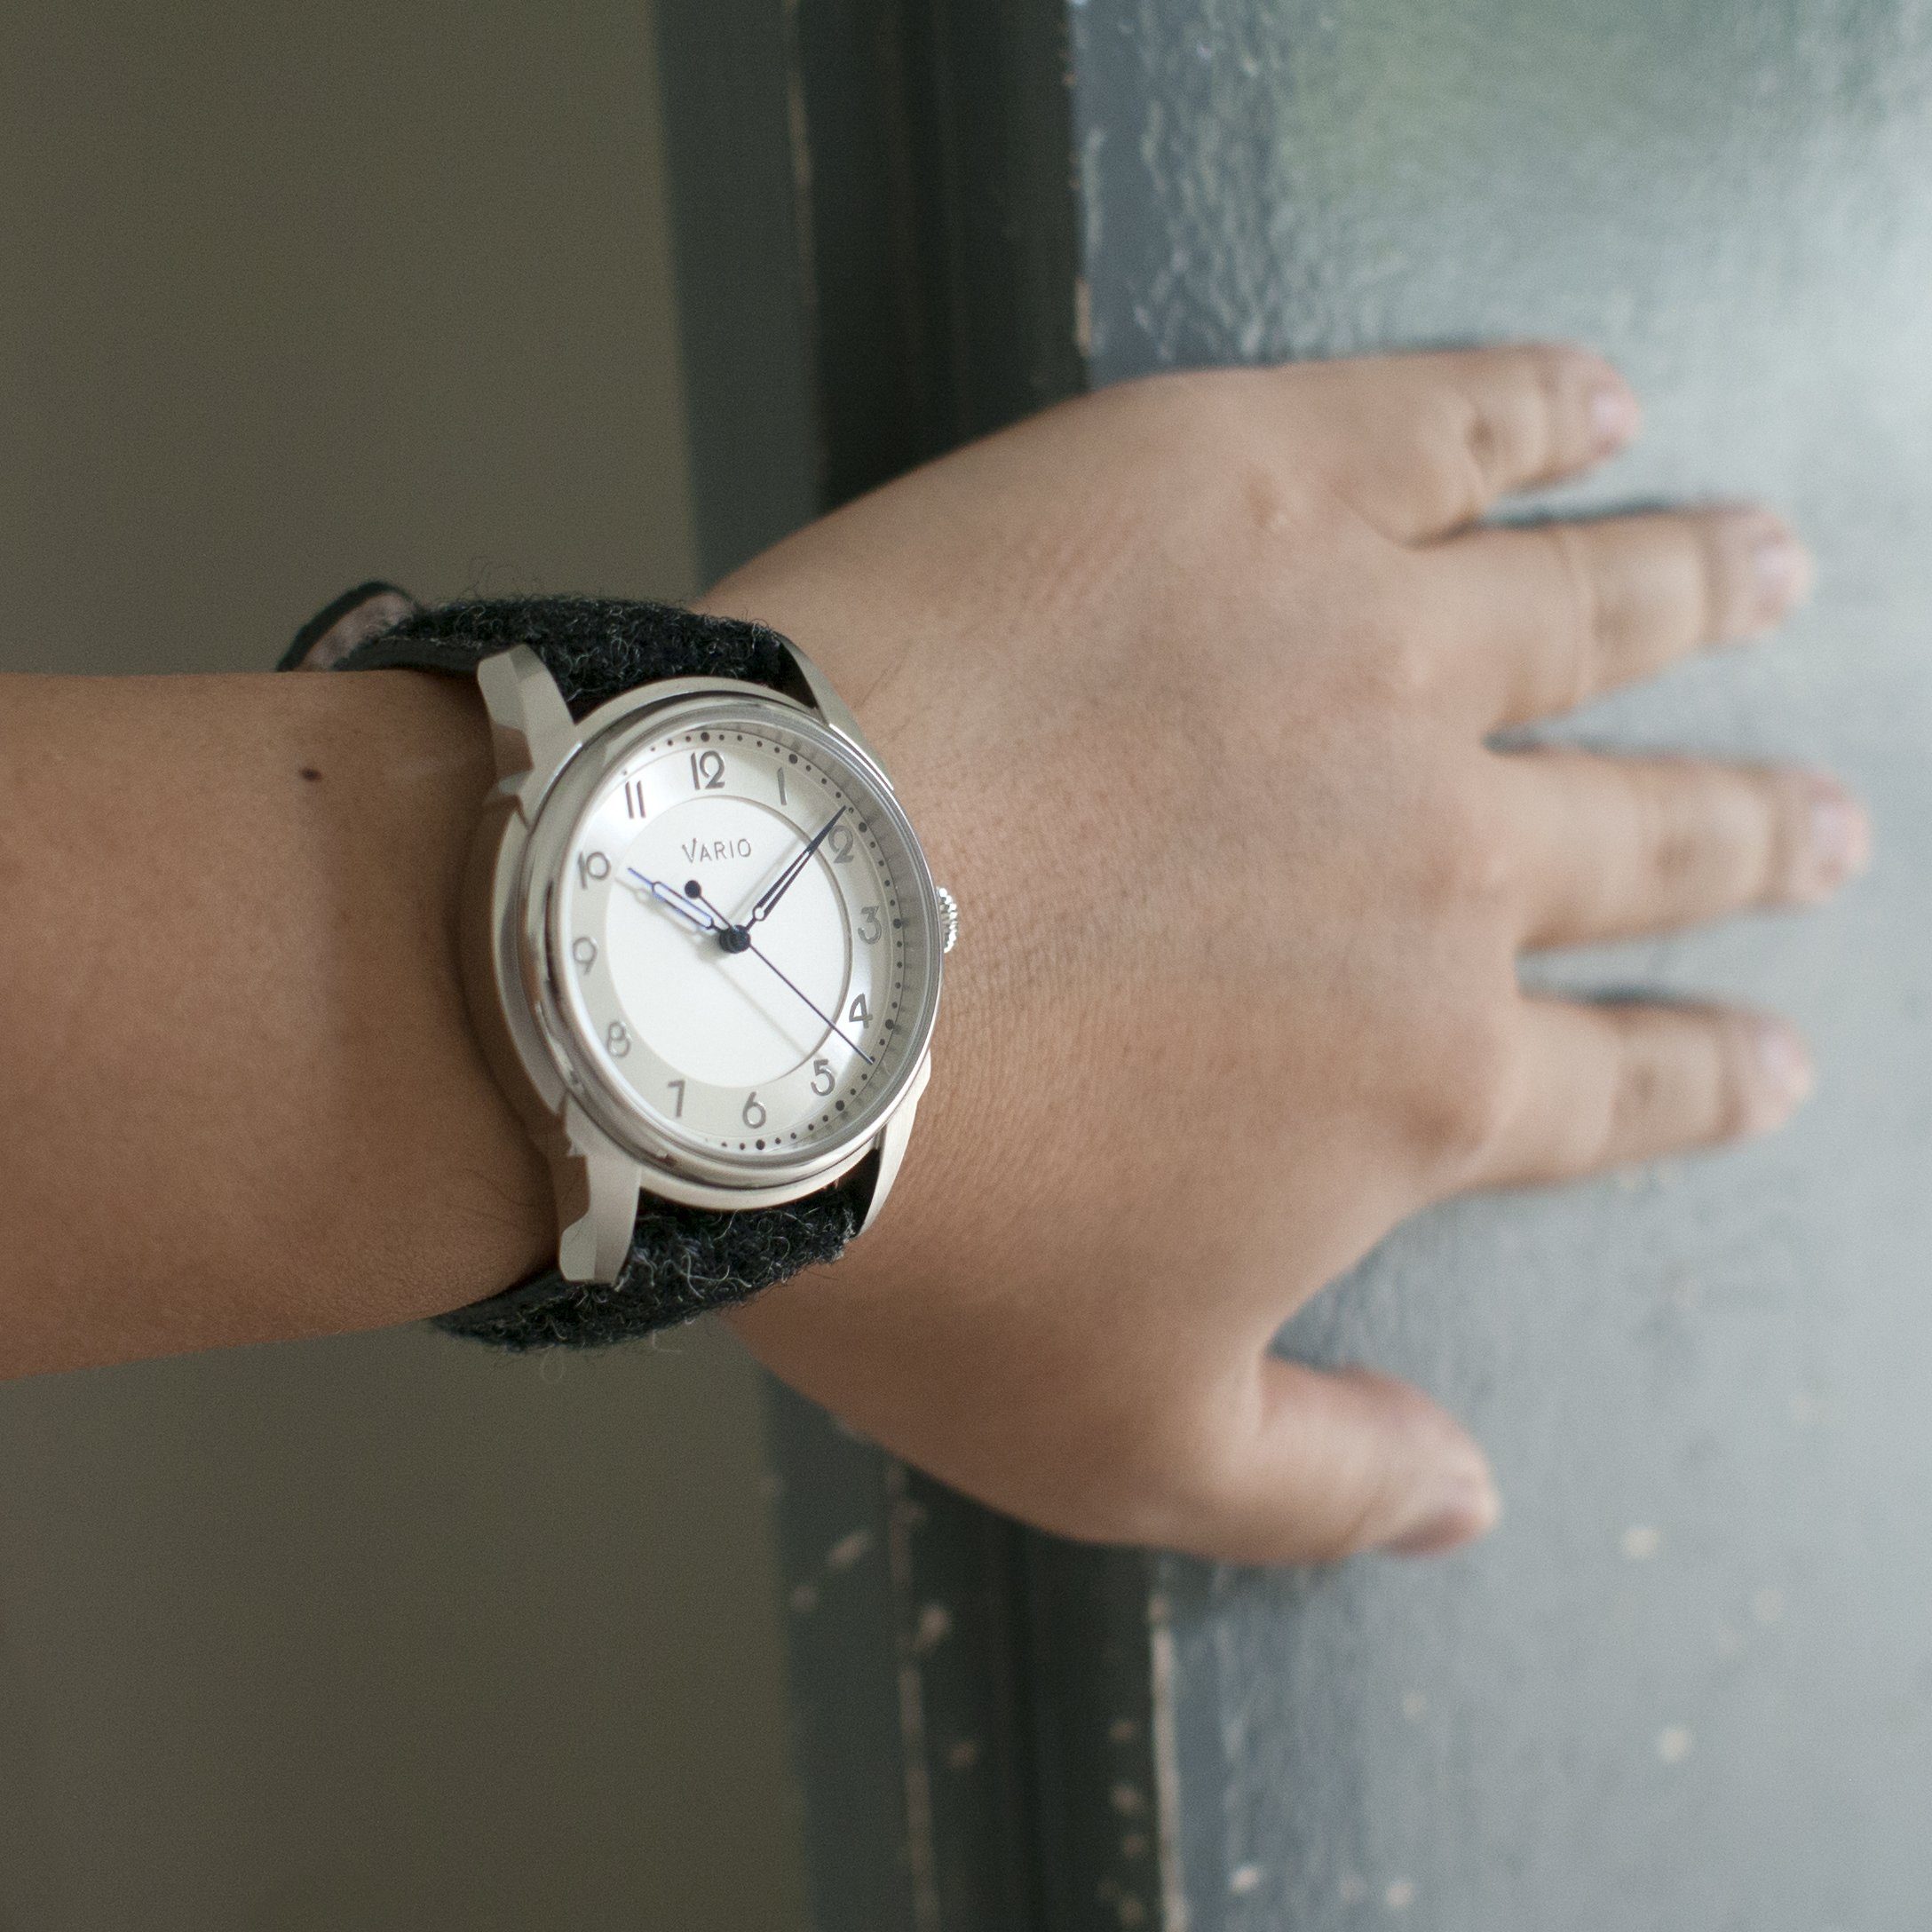 Ivan couldn't resist taking a picture of the Vario Art Deco watch while holding the door